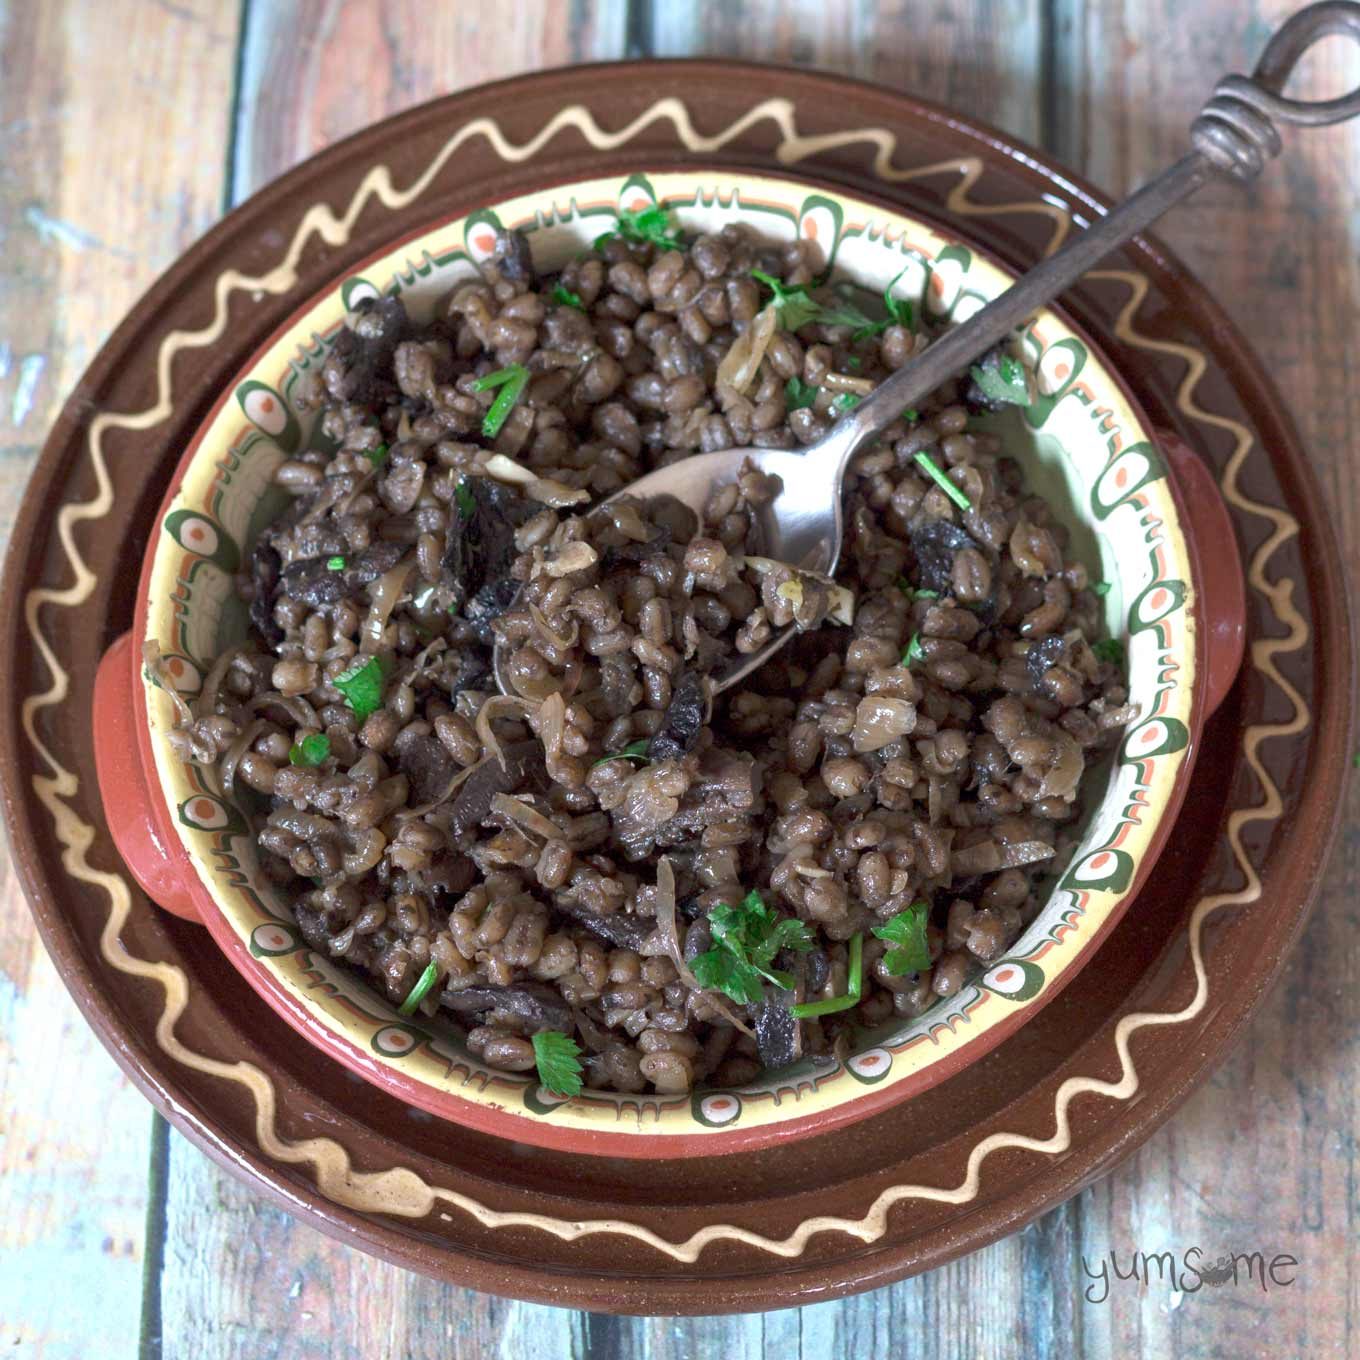 Overhead view of a rustic dish of Czech mushroom and barley risotto. A rustic fork is in the dish too.